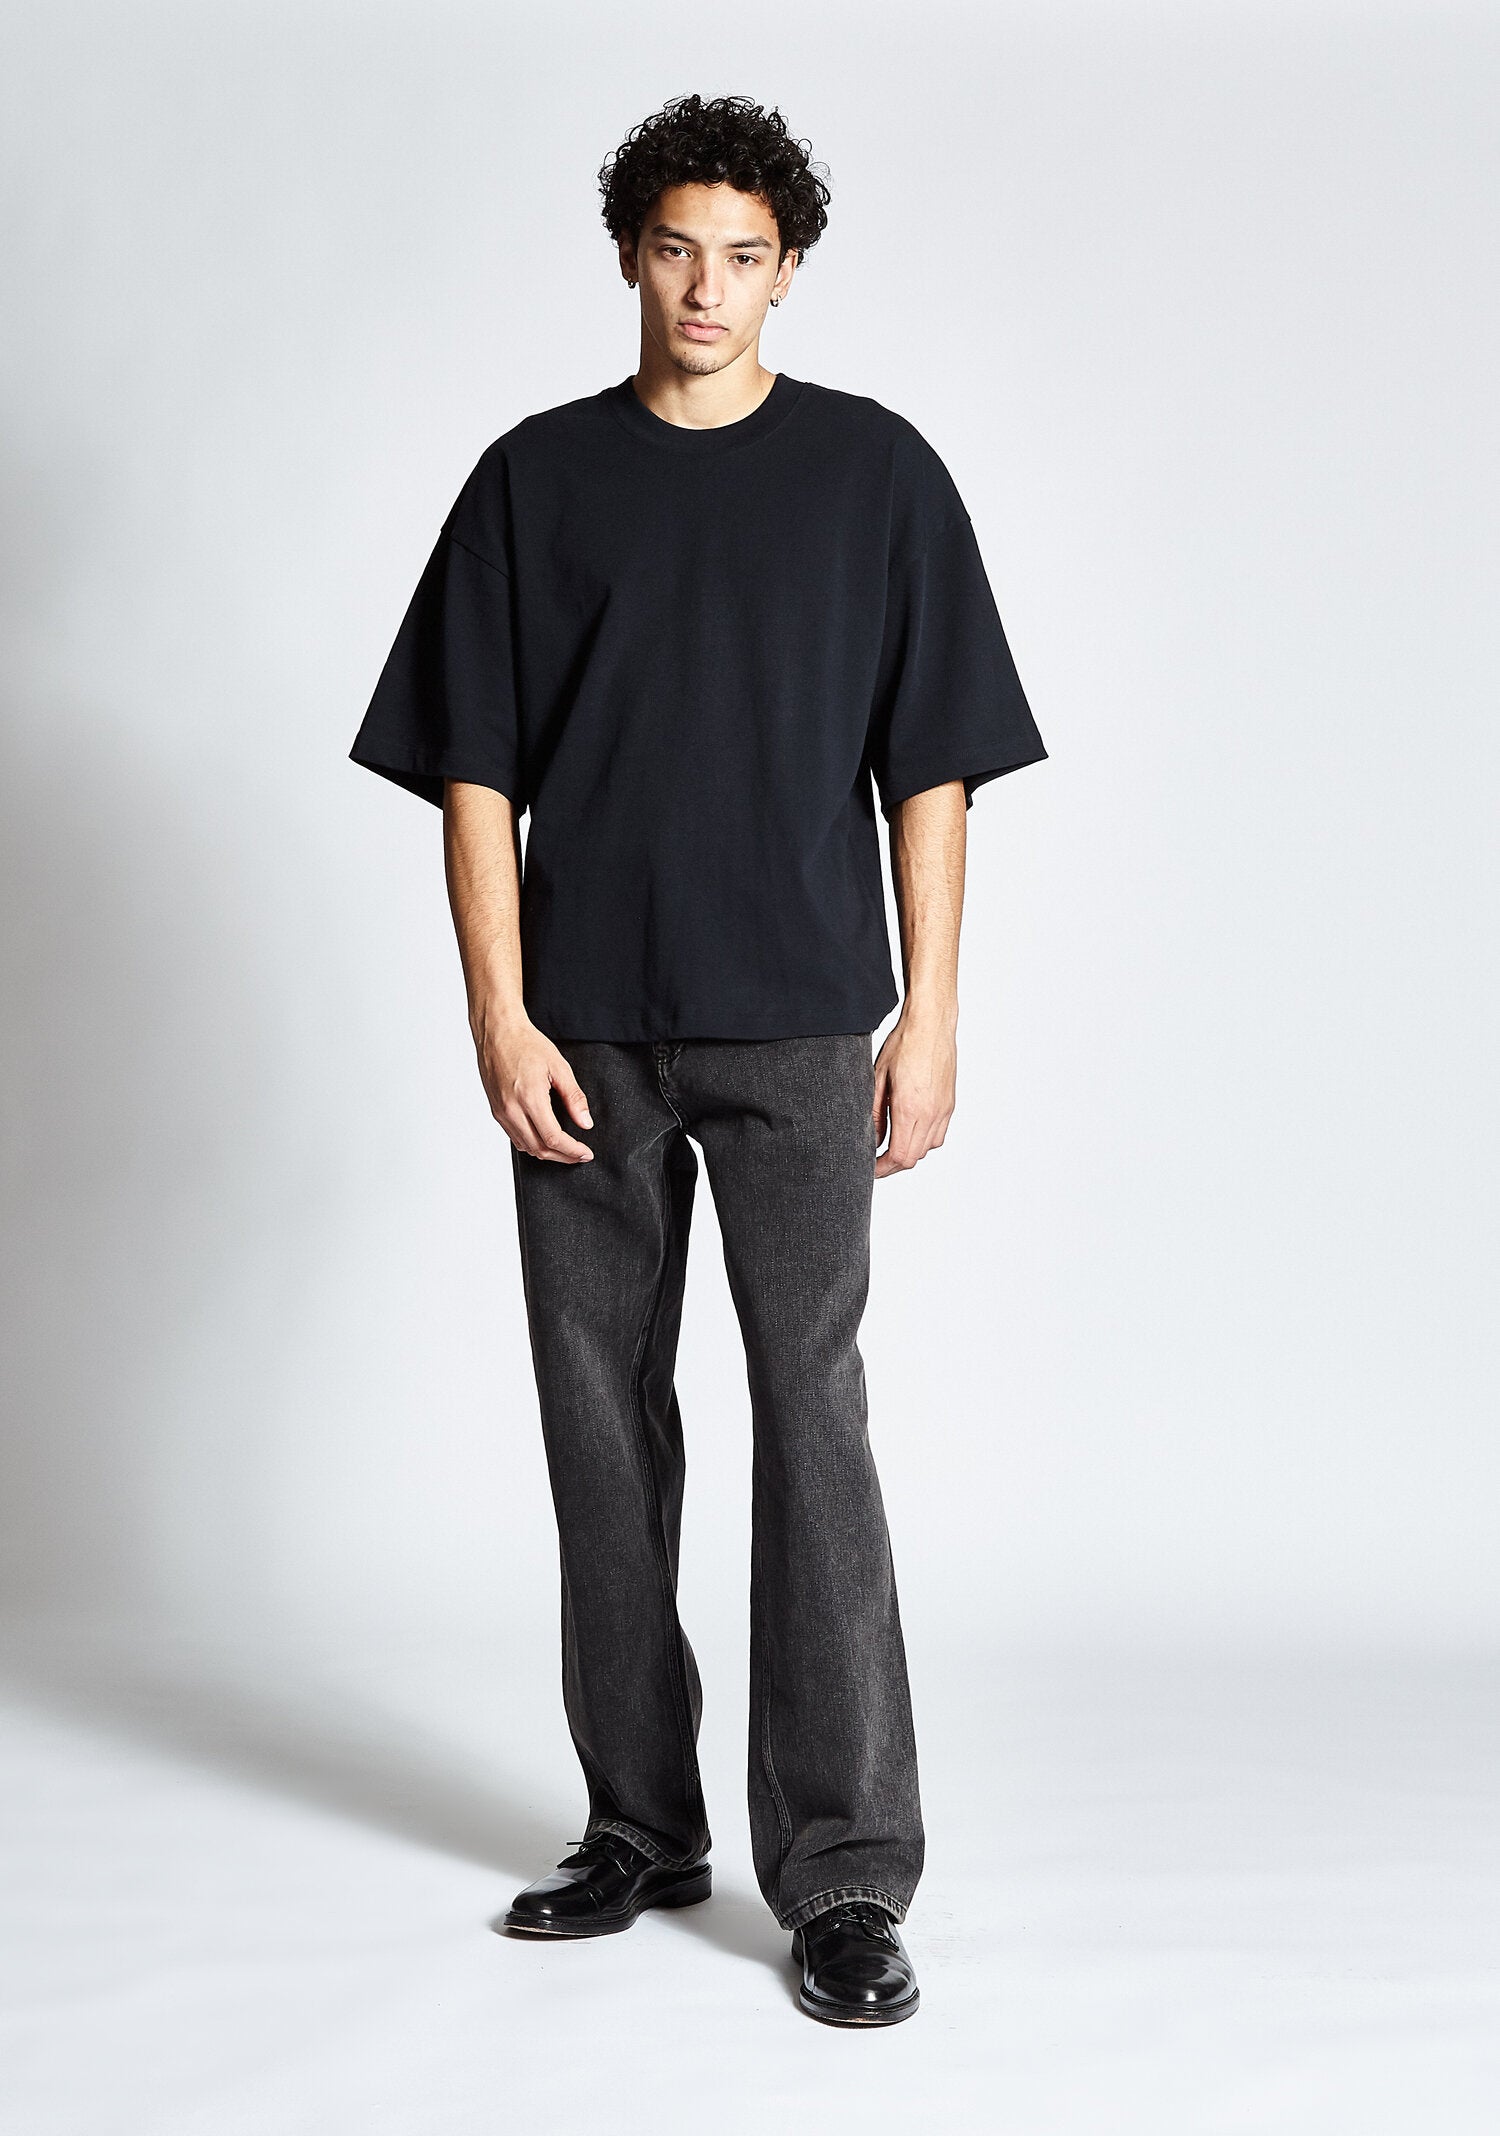 WILLY CHAVARRIA 20AW SS RUFF NECK T